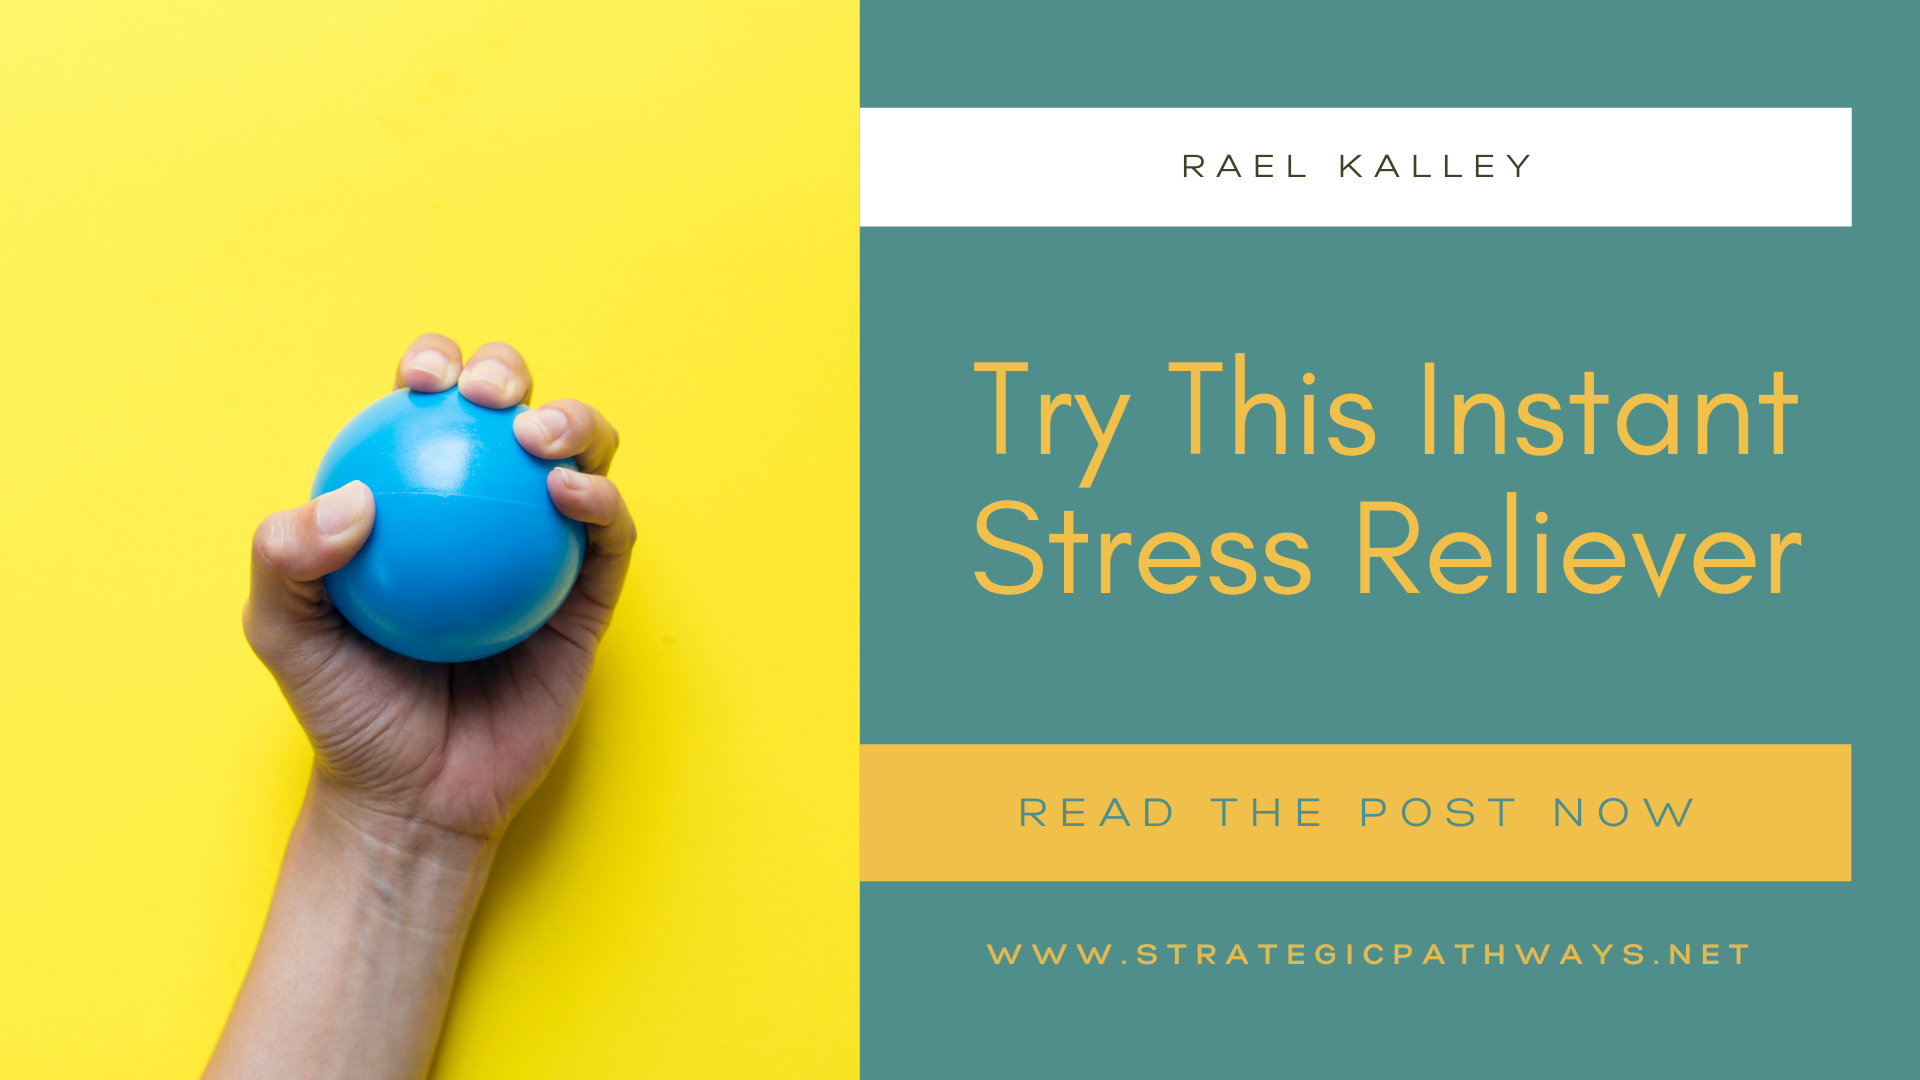 Text says "Try This Instant Stress Reliever" and an image of a hand holding a stress ball